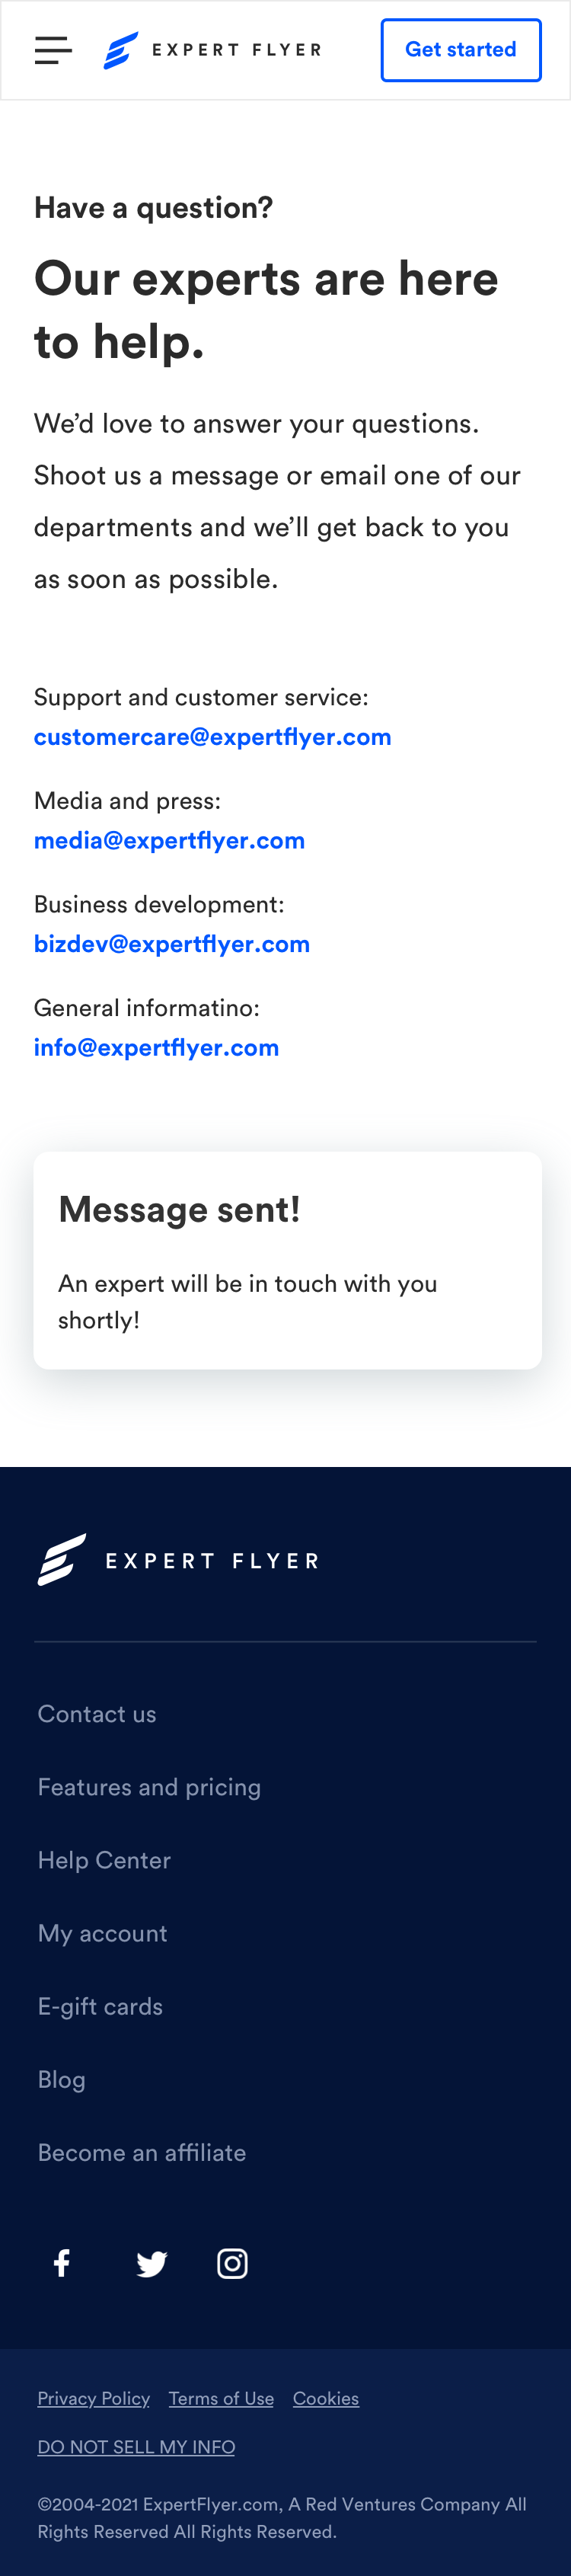 High-fidelity mockup of mobile contact page - message sent